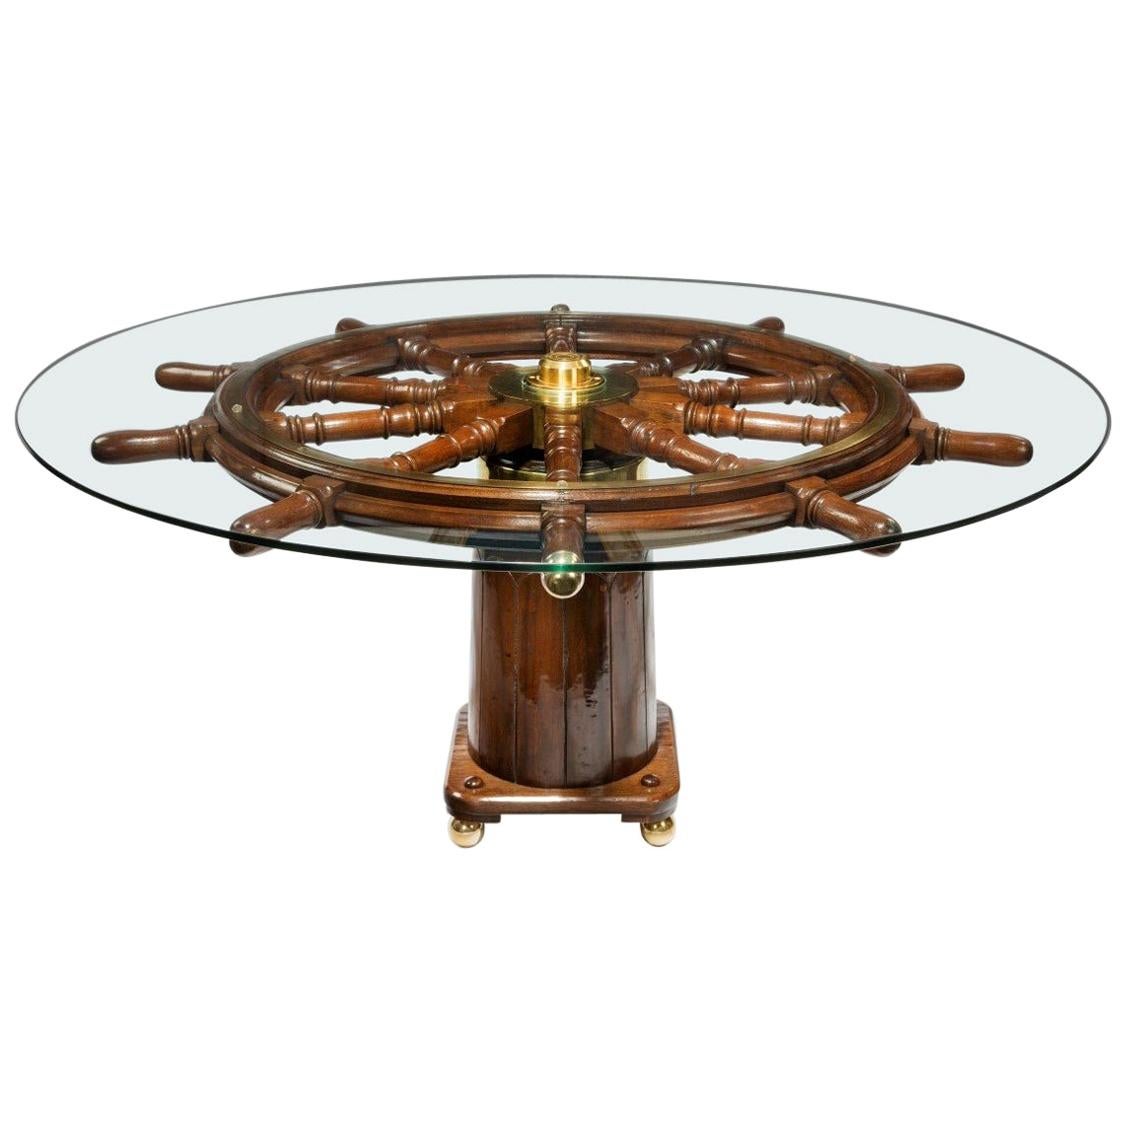 Dining Table Made from a 19th Century Ship's Steering Wheel